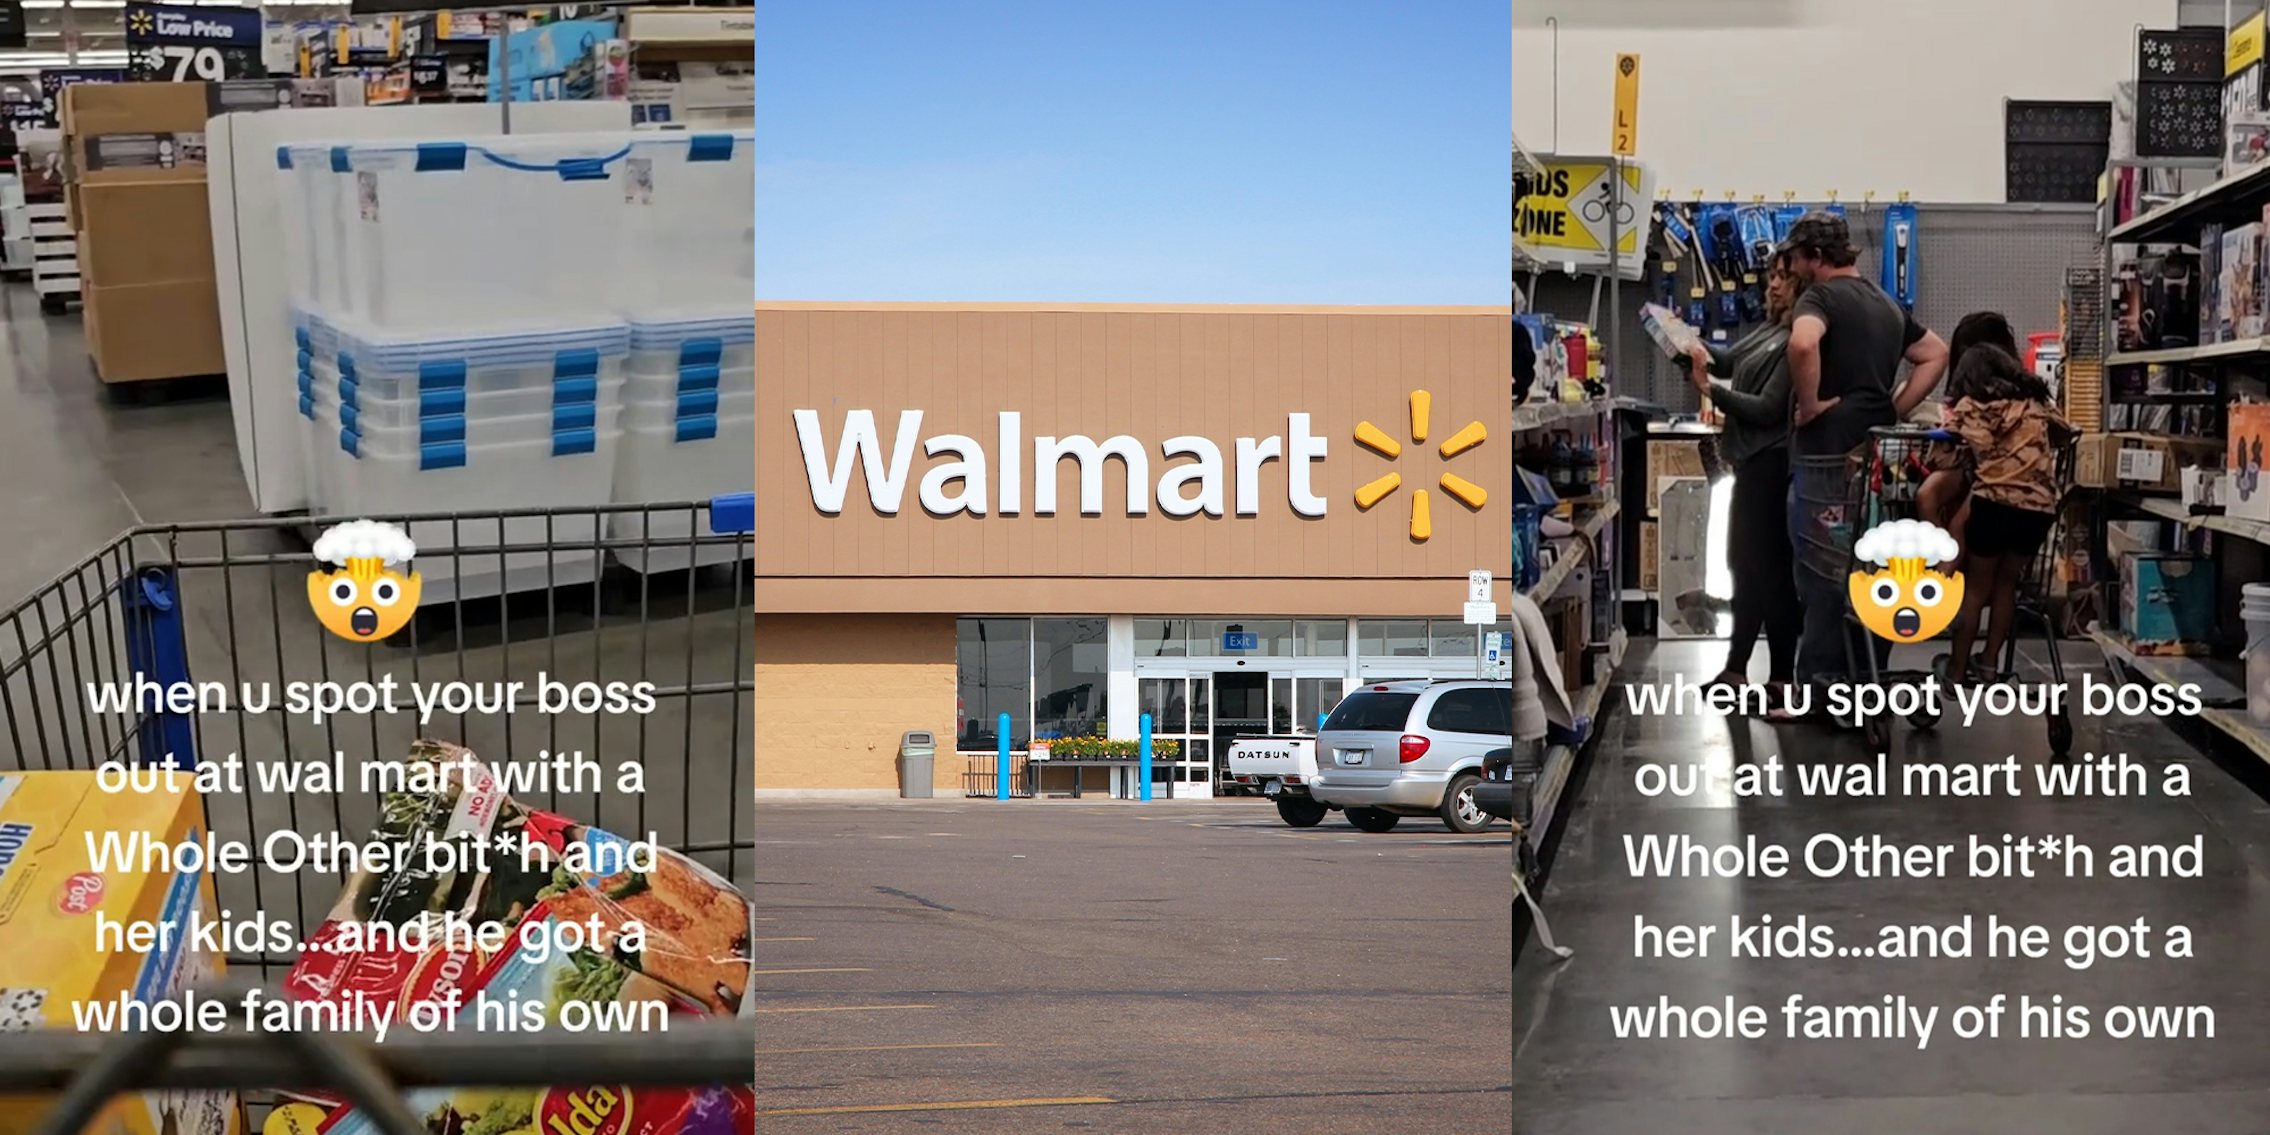 Worker says she spotted married boss at Walmart with another woman